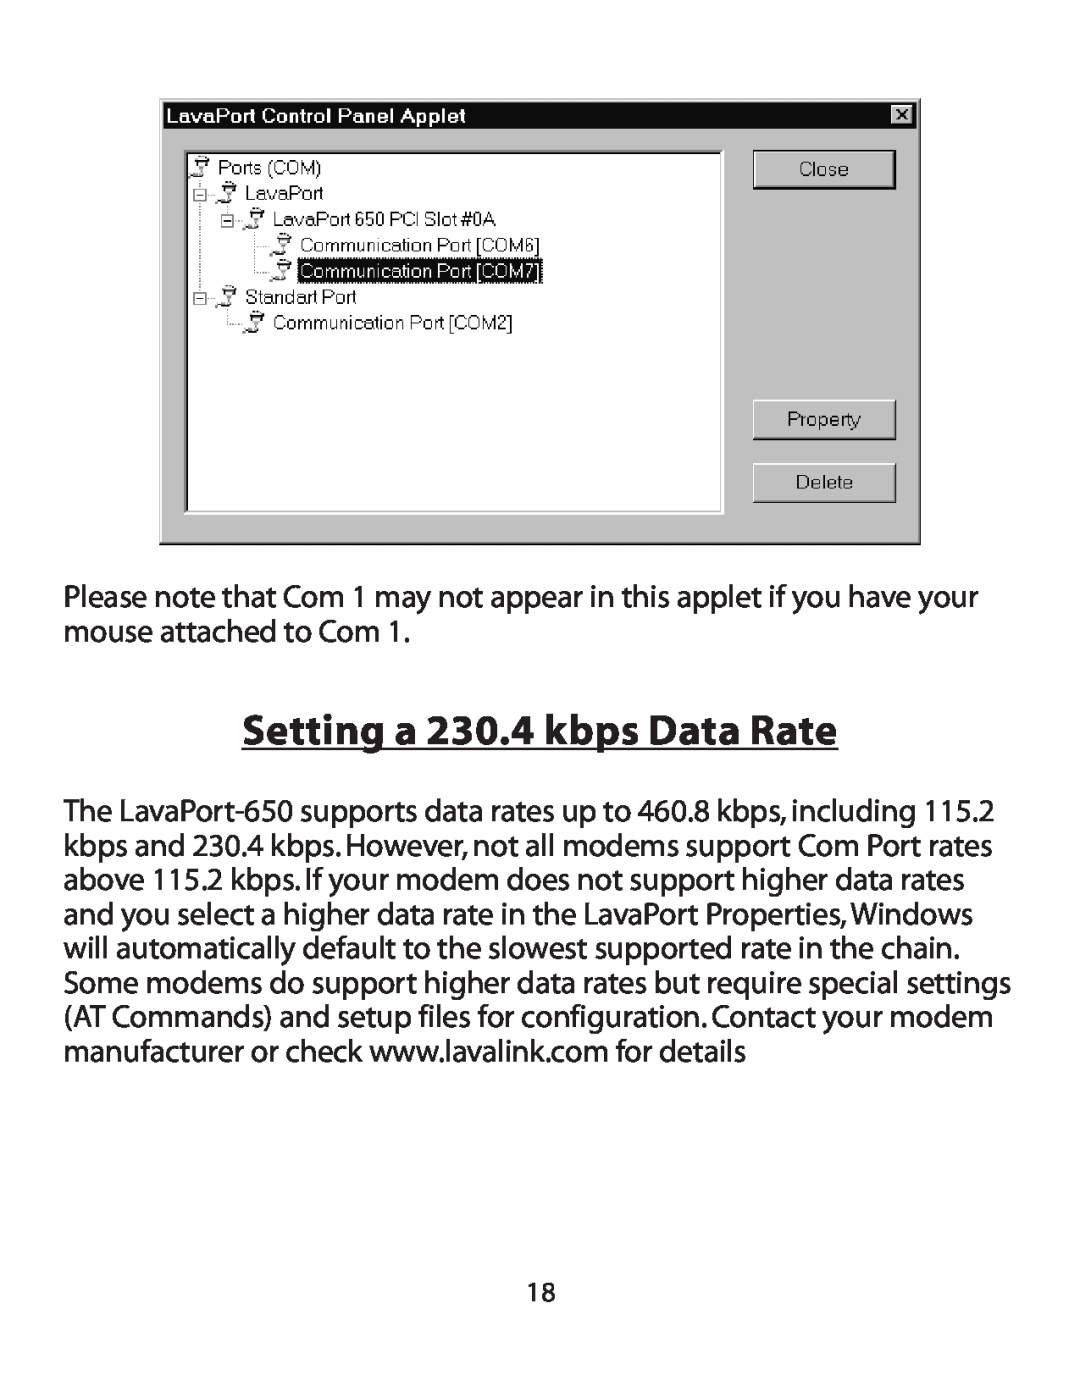 Lava Computer 650 installation manual Setting a 230.4 kbps Data Rate 